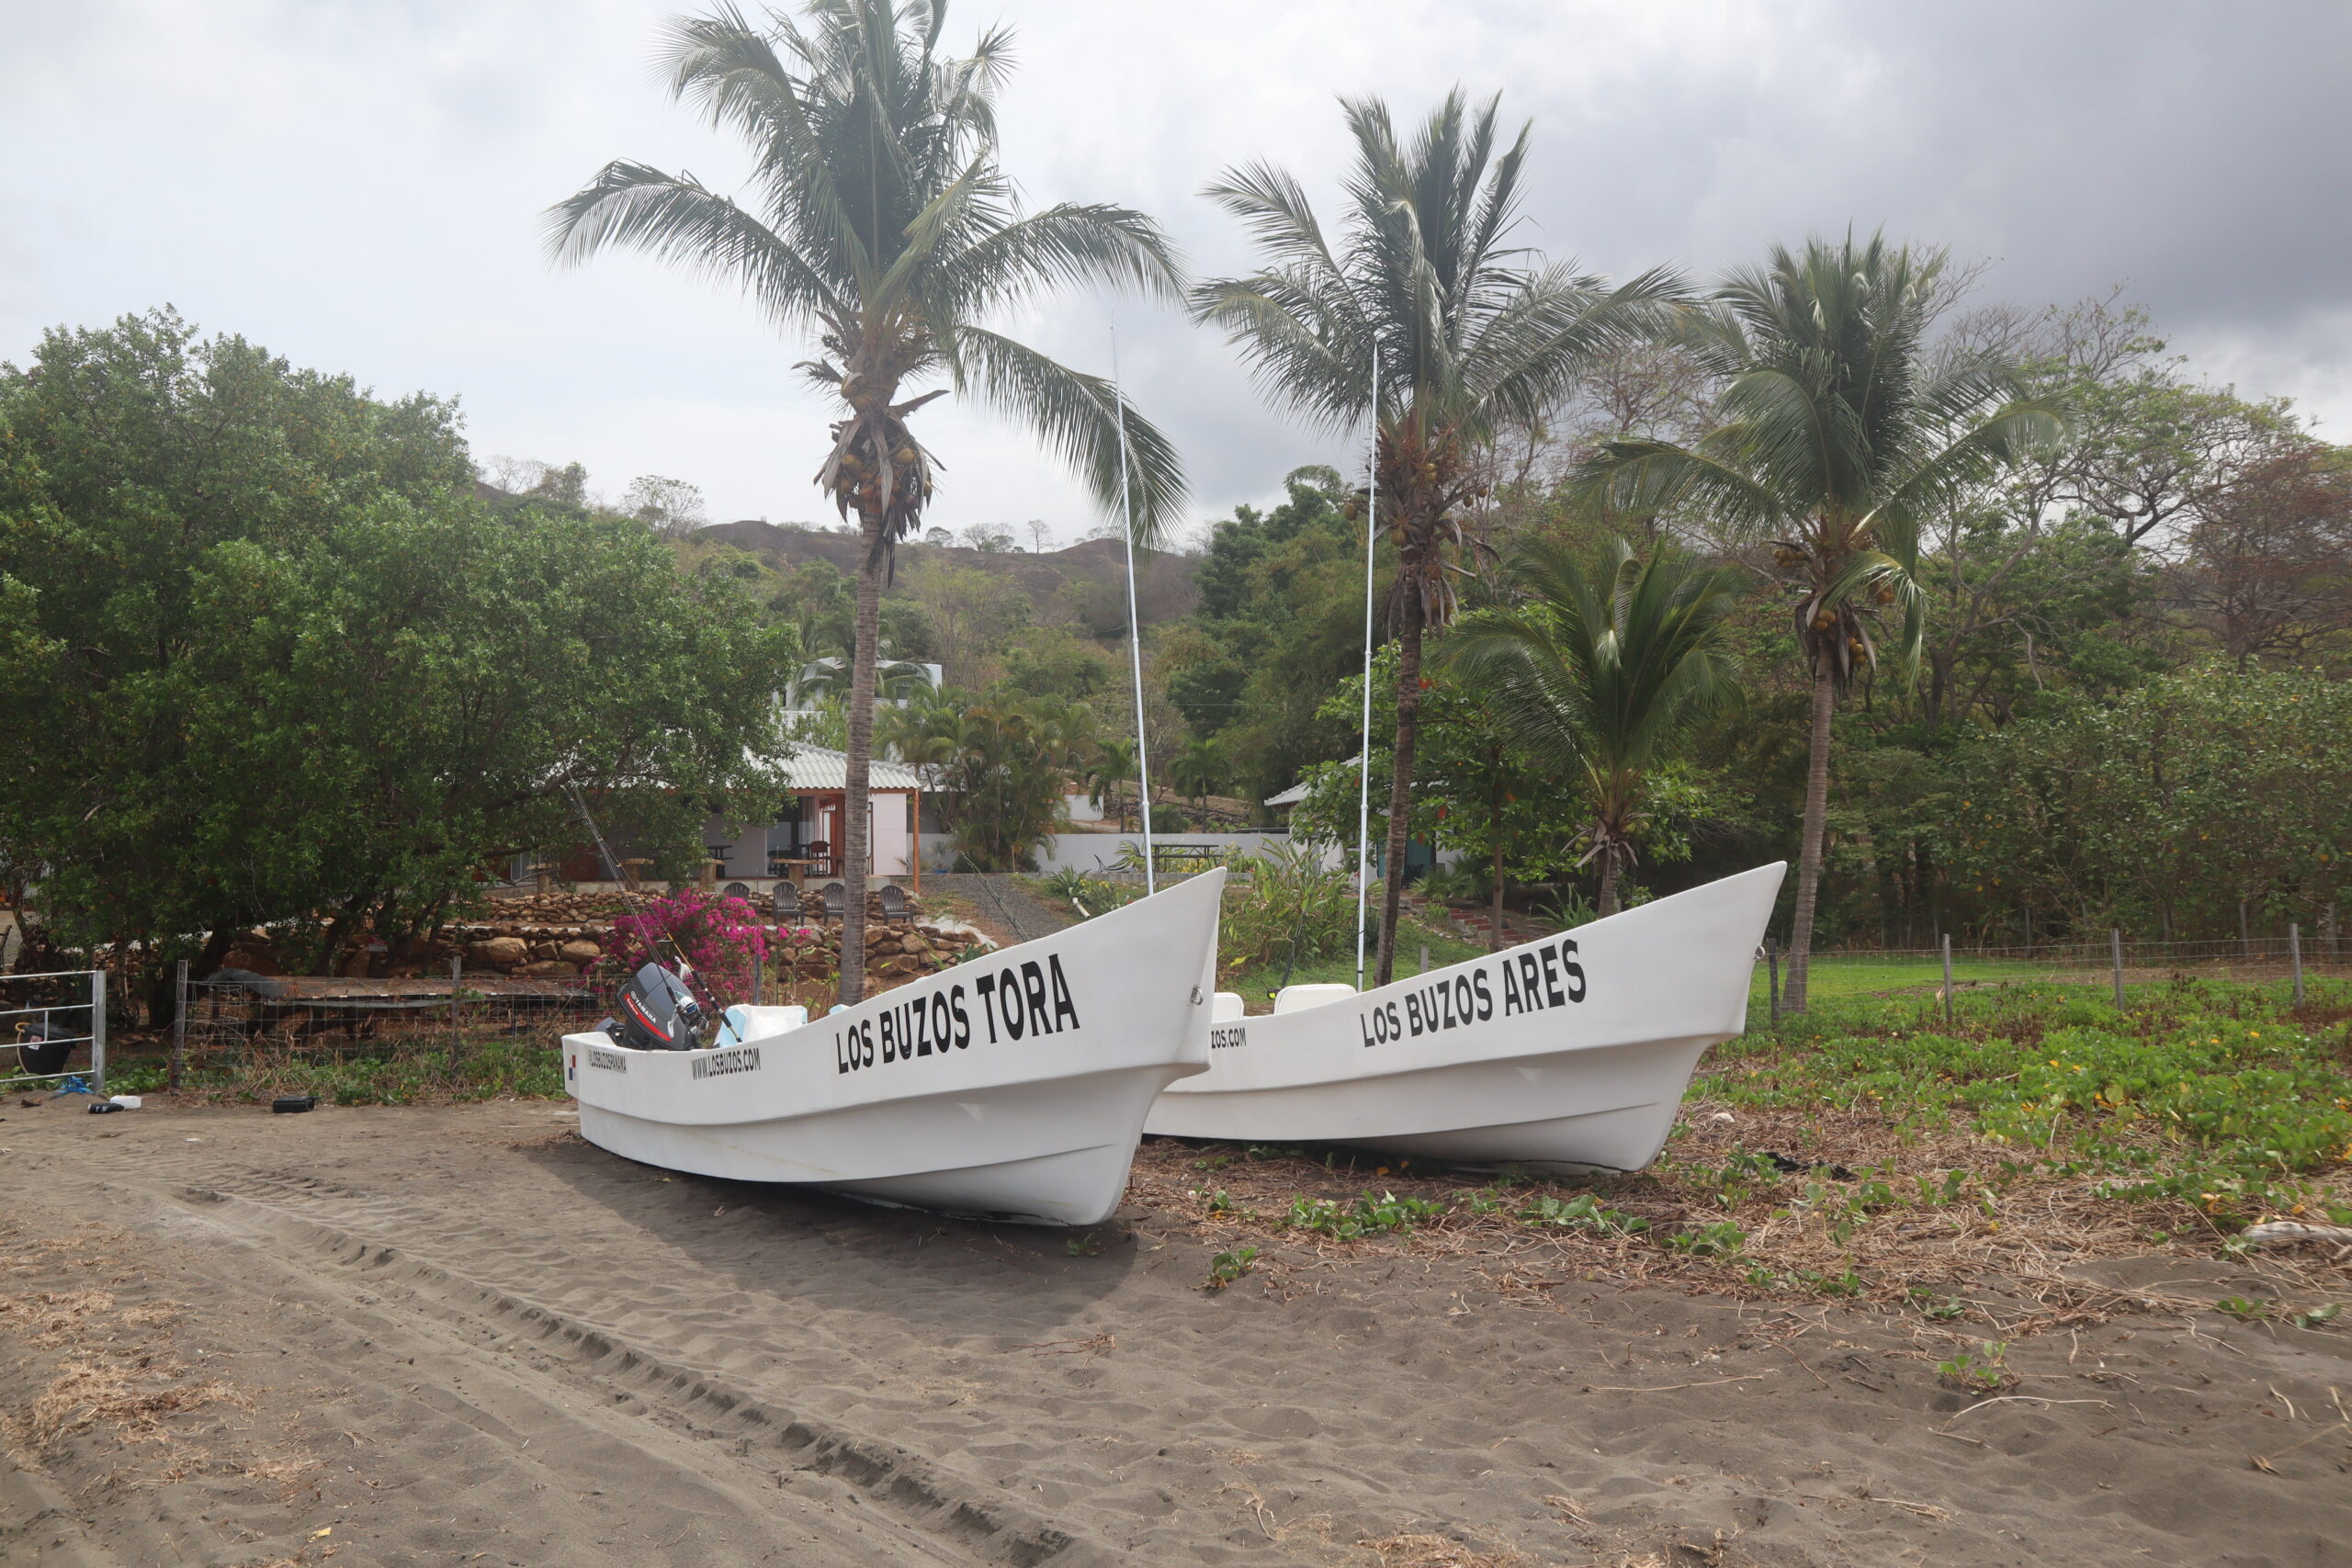 The two 27' super pangas at the Los Buzos Resort in Panama